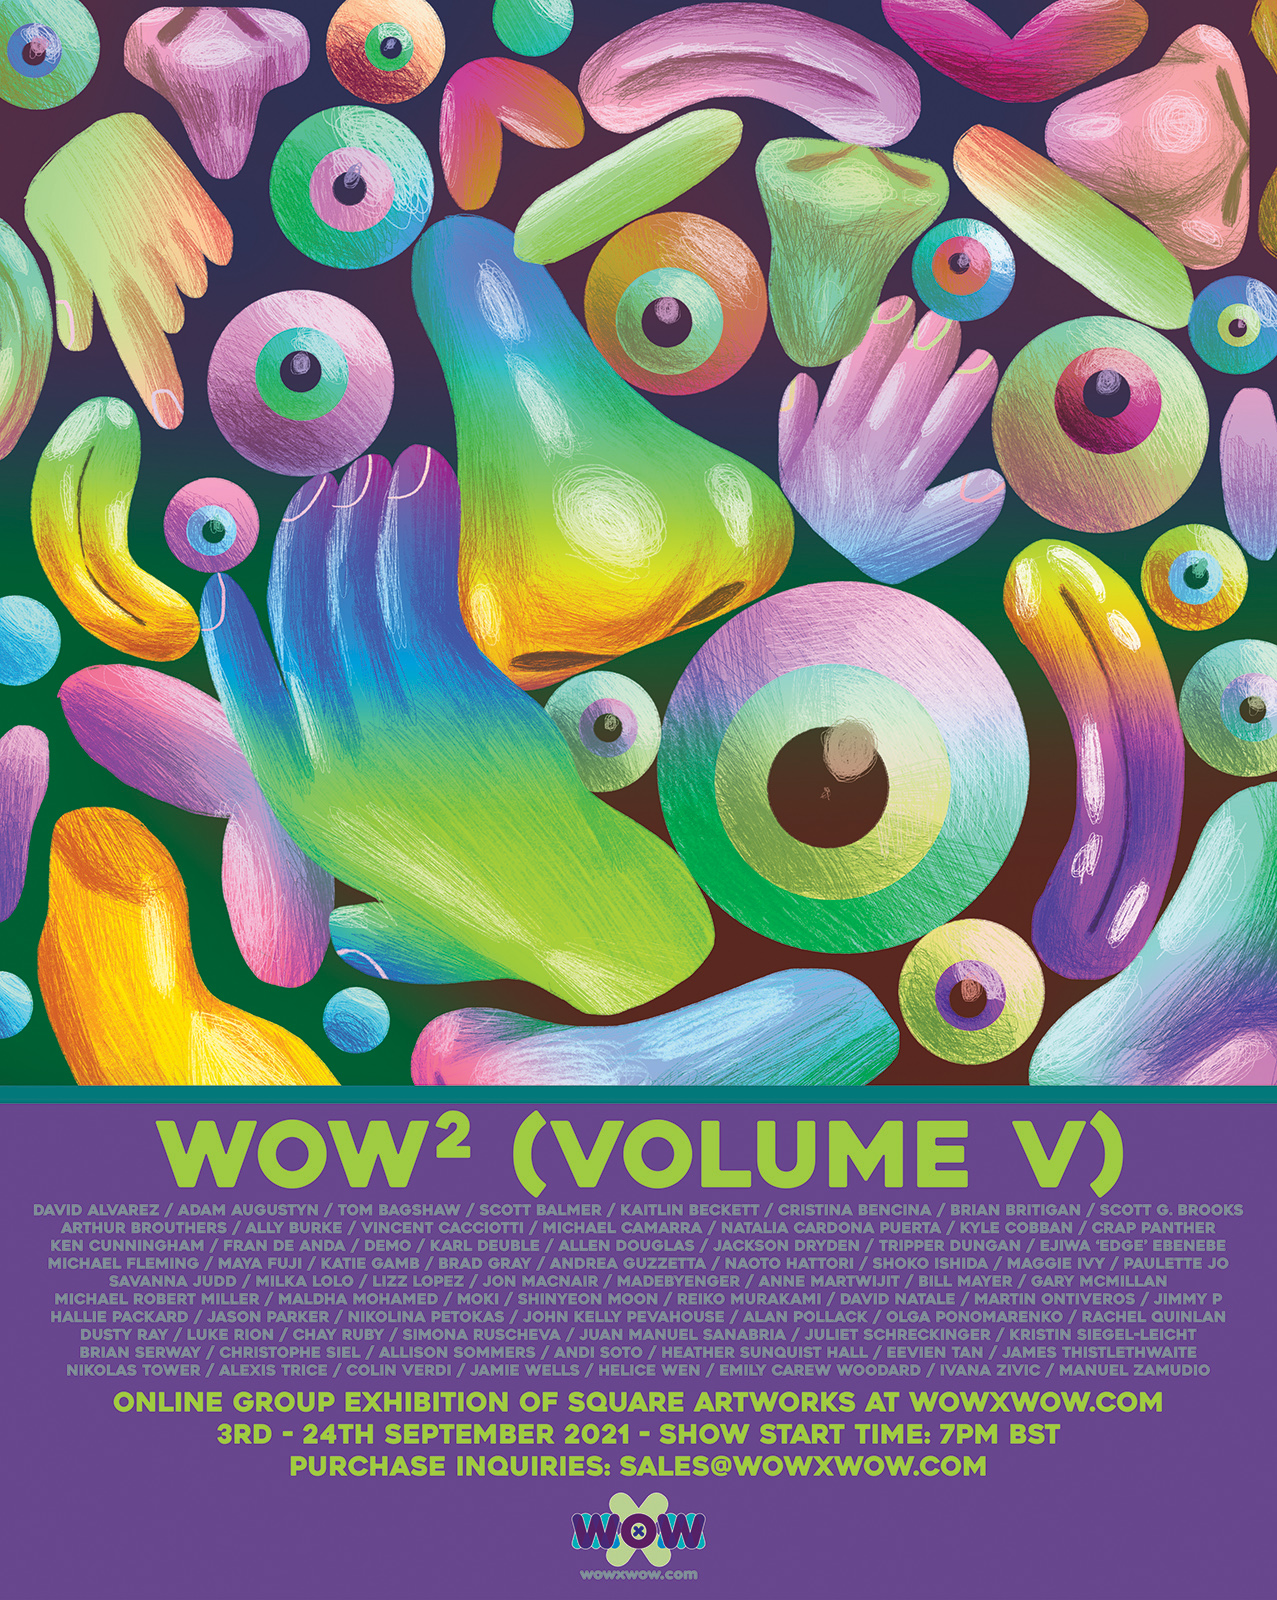 Wow x Wow vol V opens this Friday